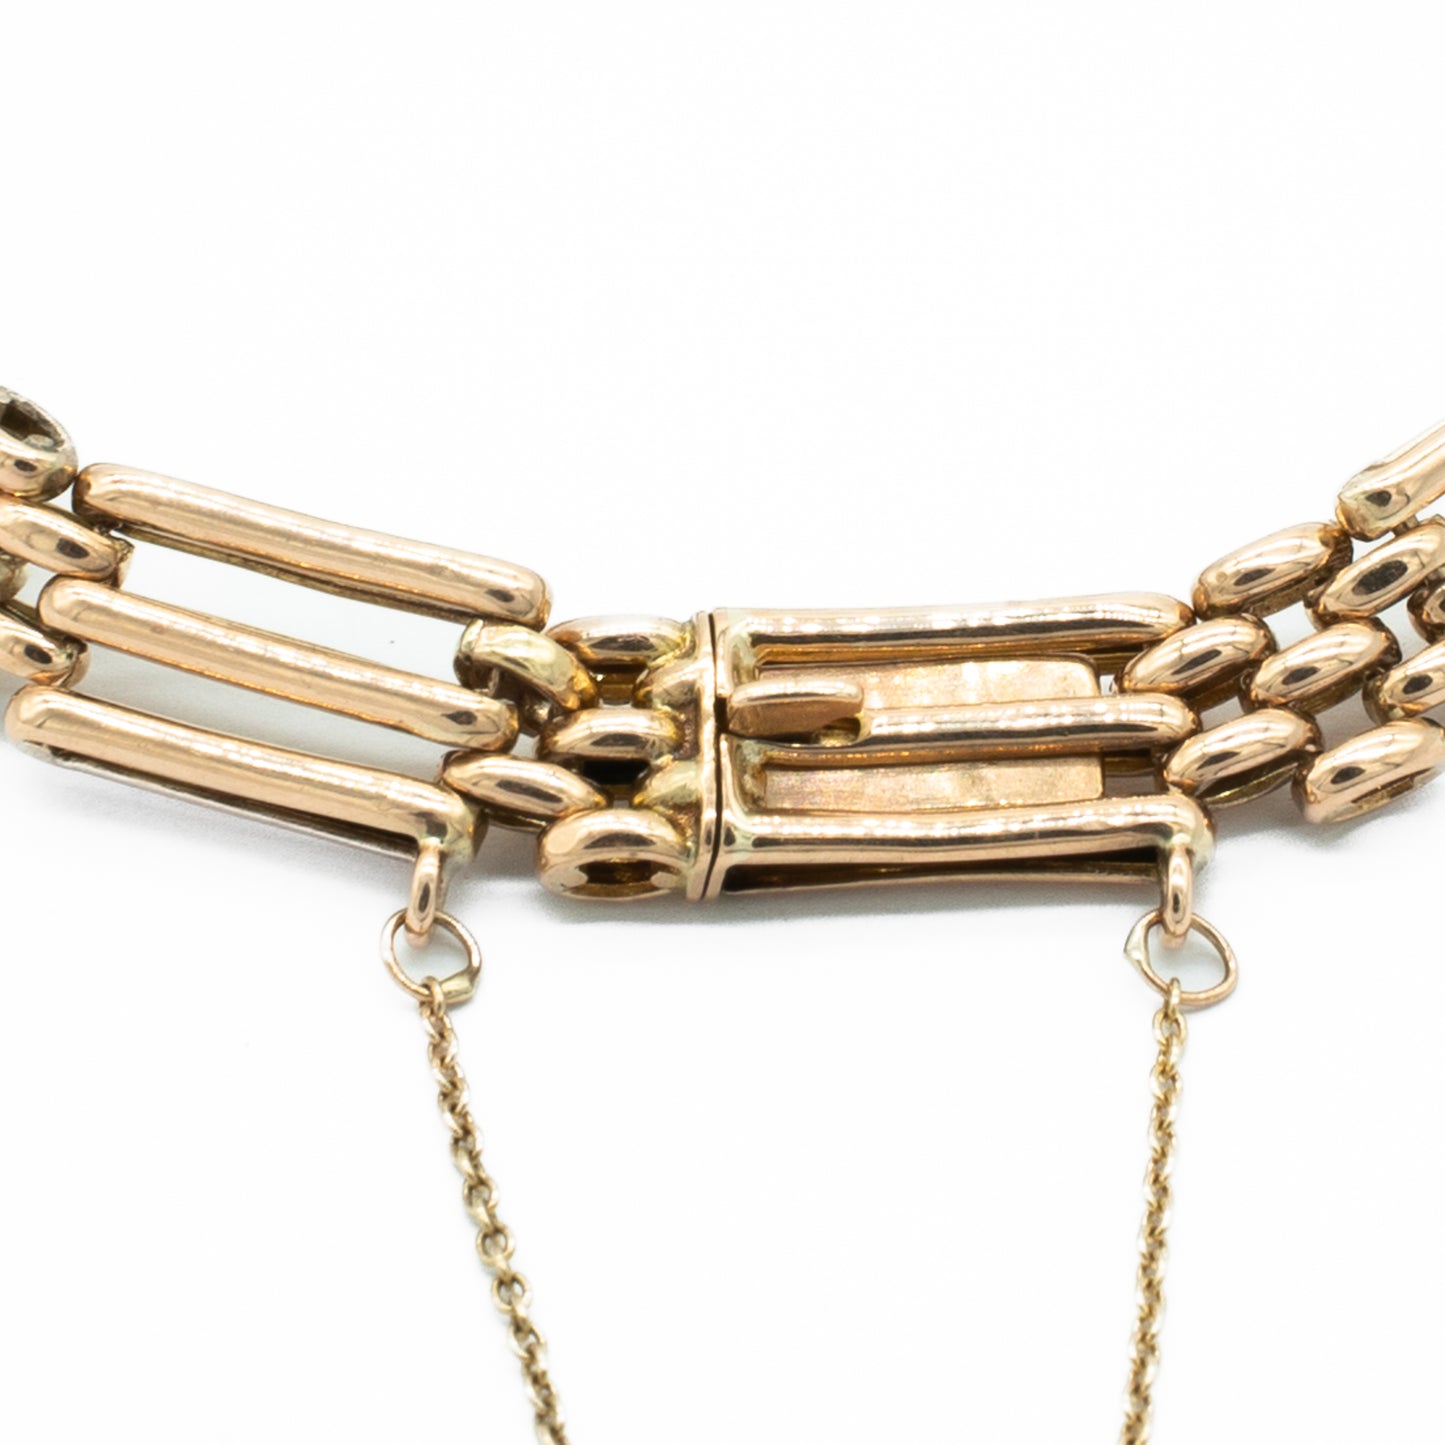 Classic Victorian 9ct rose gold gateleg bracelet with a safety chain.